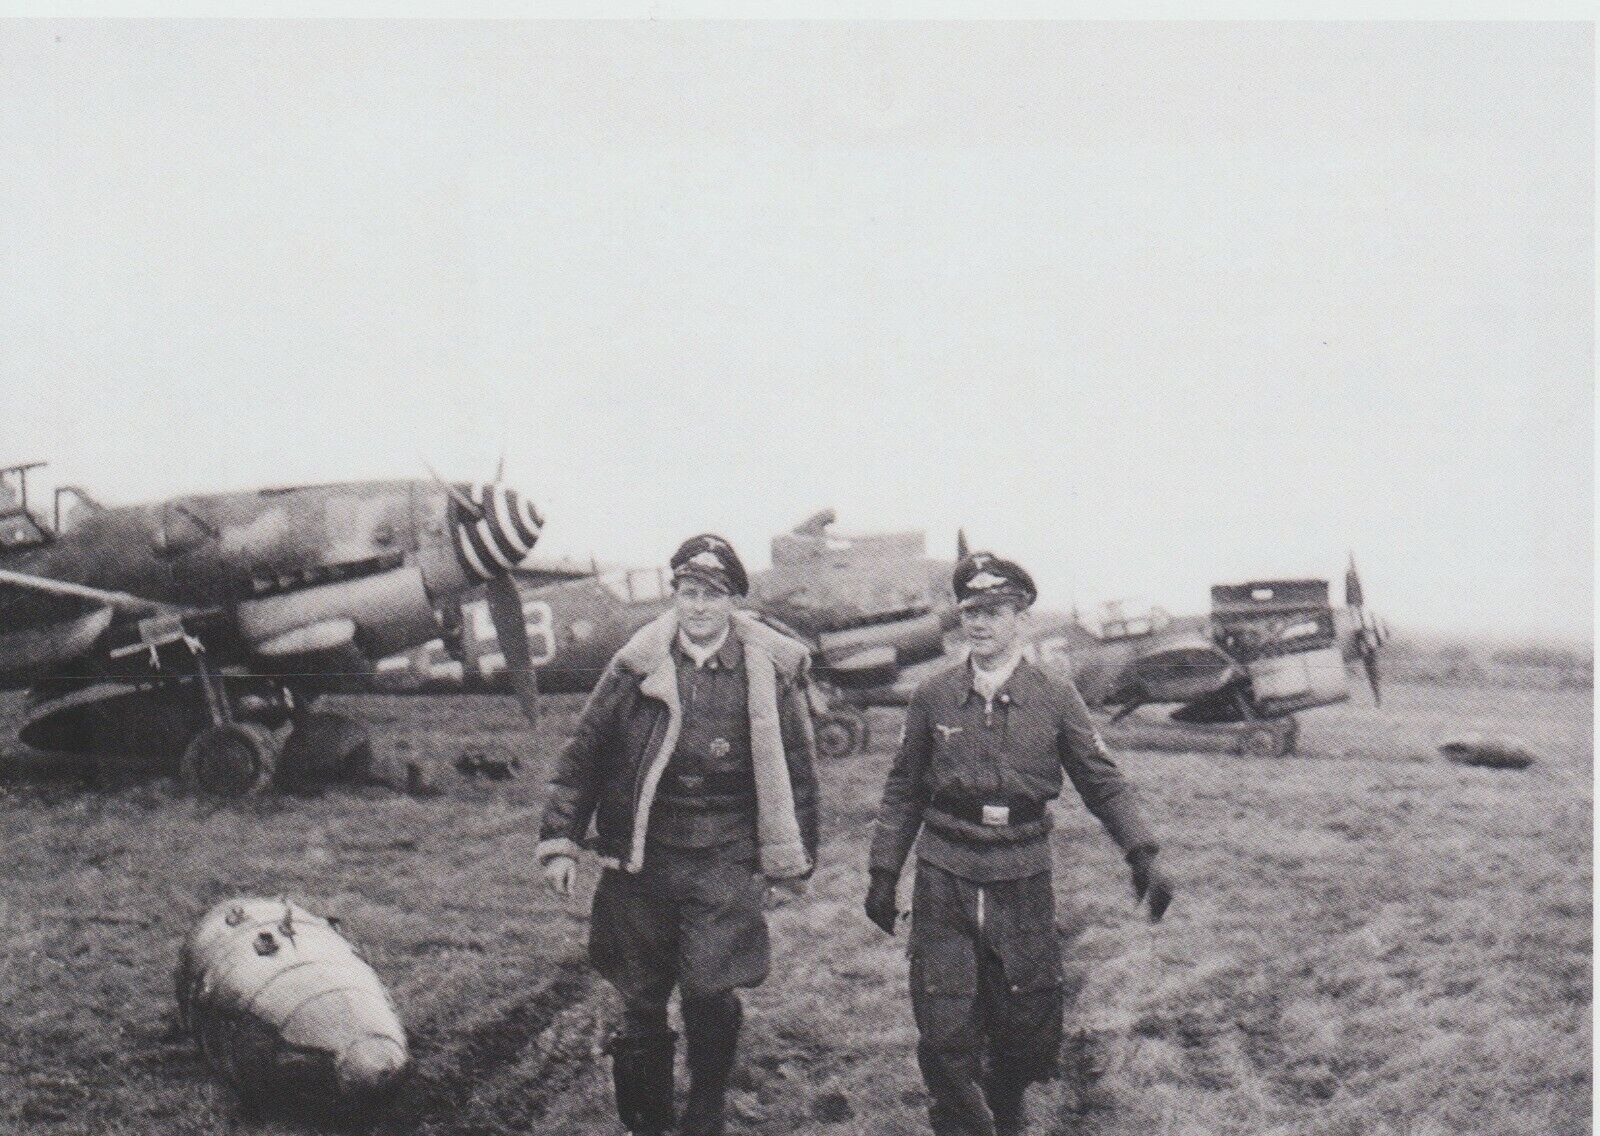 OFw Muller and Fw Blume of Luftwaffe 4/JG27 with their BF109G-6s WW2 4x6*